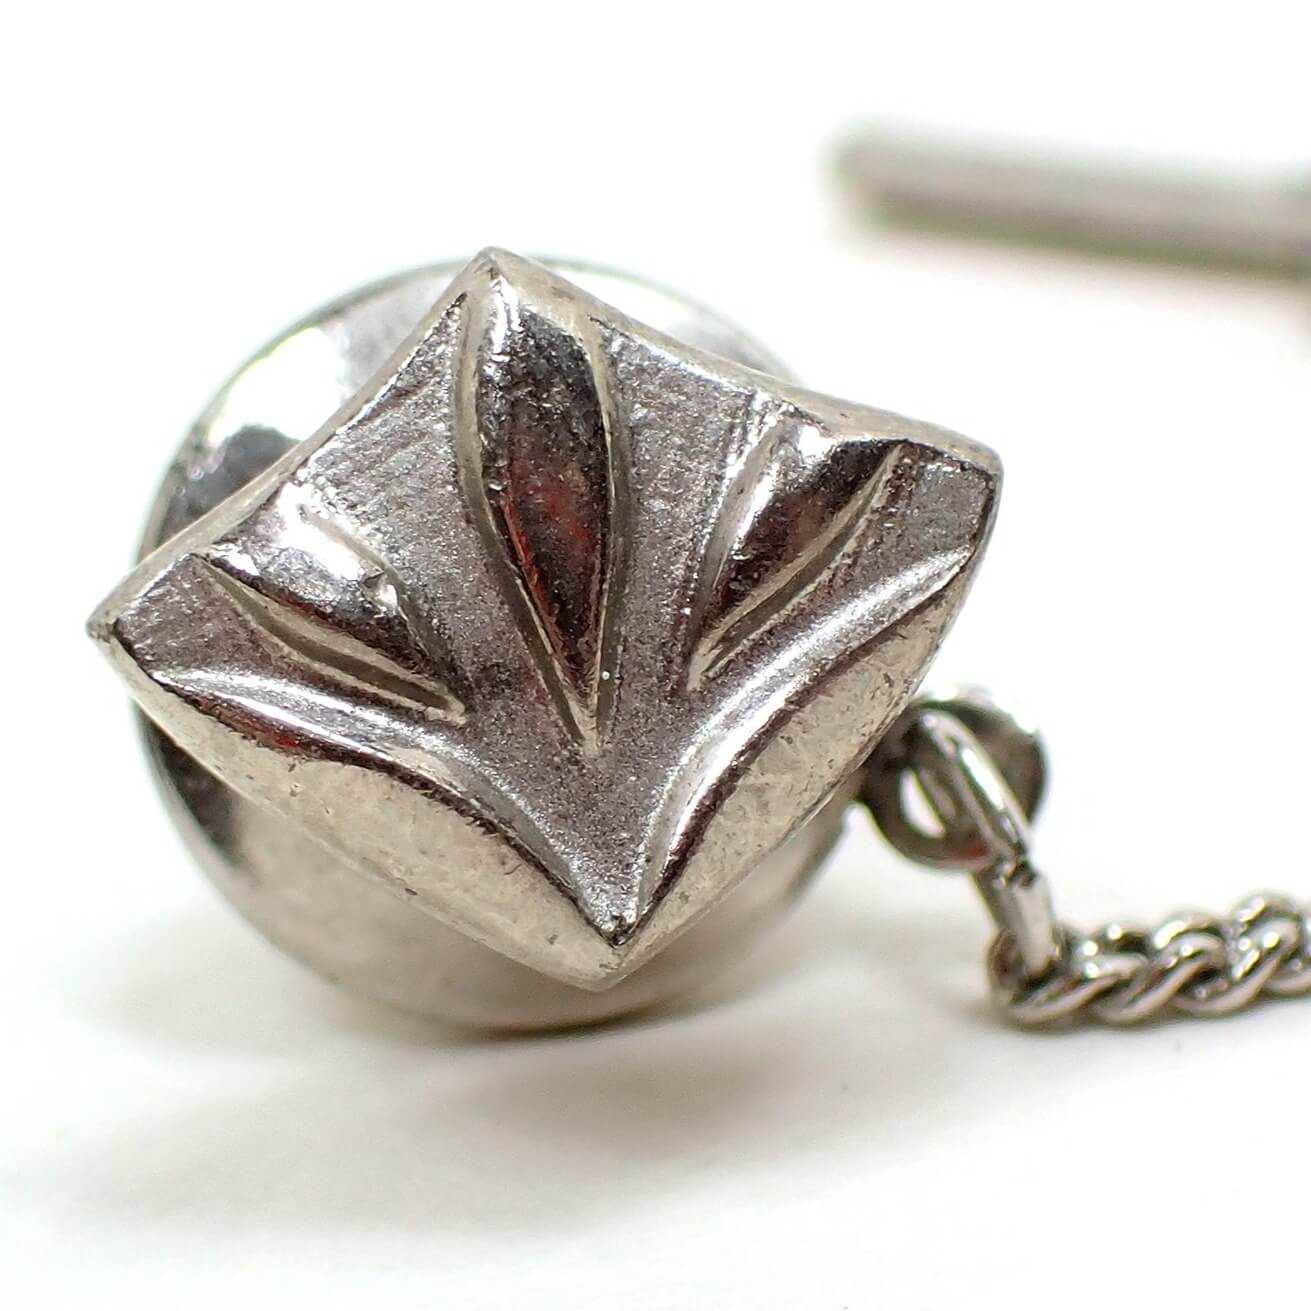 Front view of the Mid Century vintage Modernist style tie tack. It is silver tone in color. It has a point towards the bottom and the top flares out with a leaf like design.